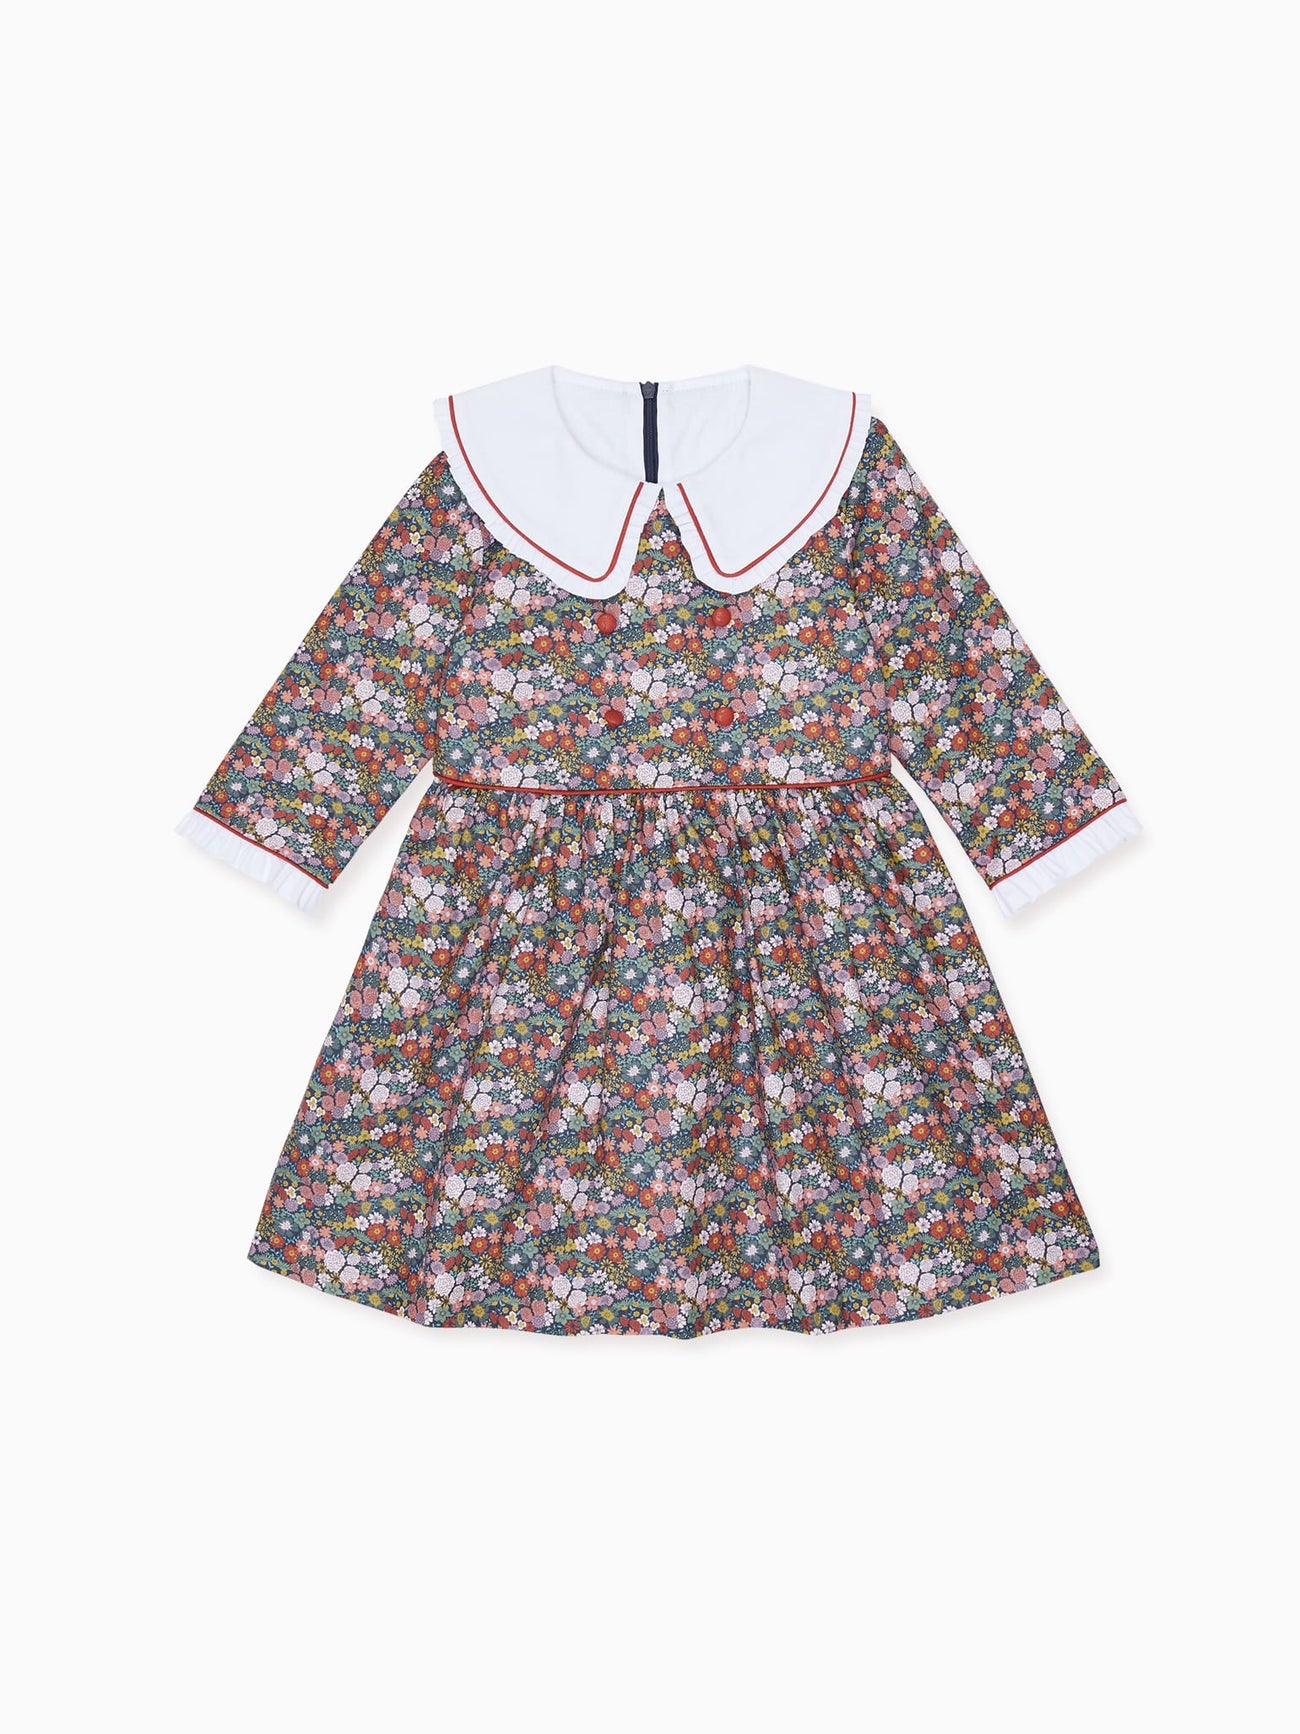 Navy Floral Provenza Girl Dress